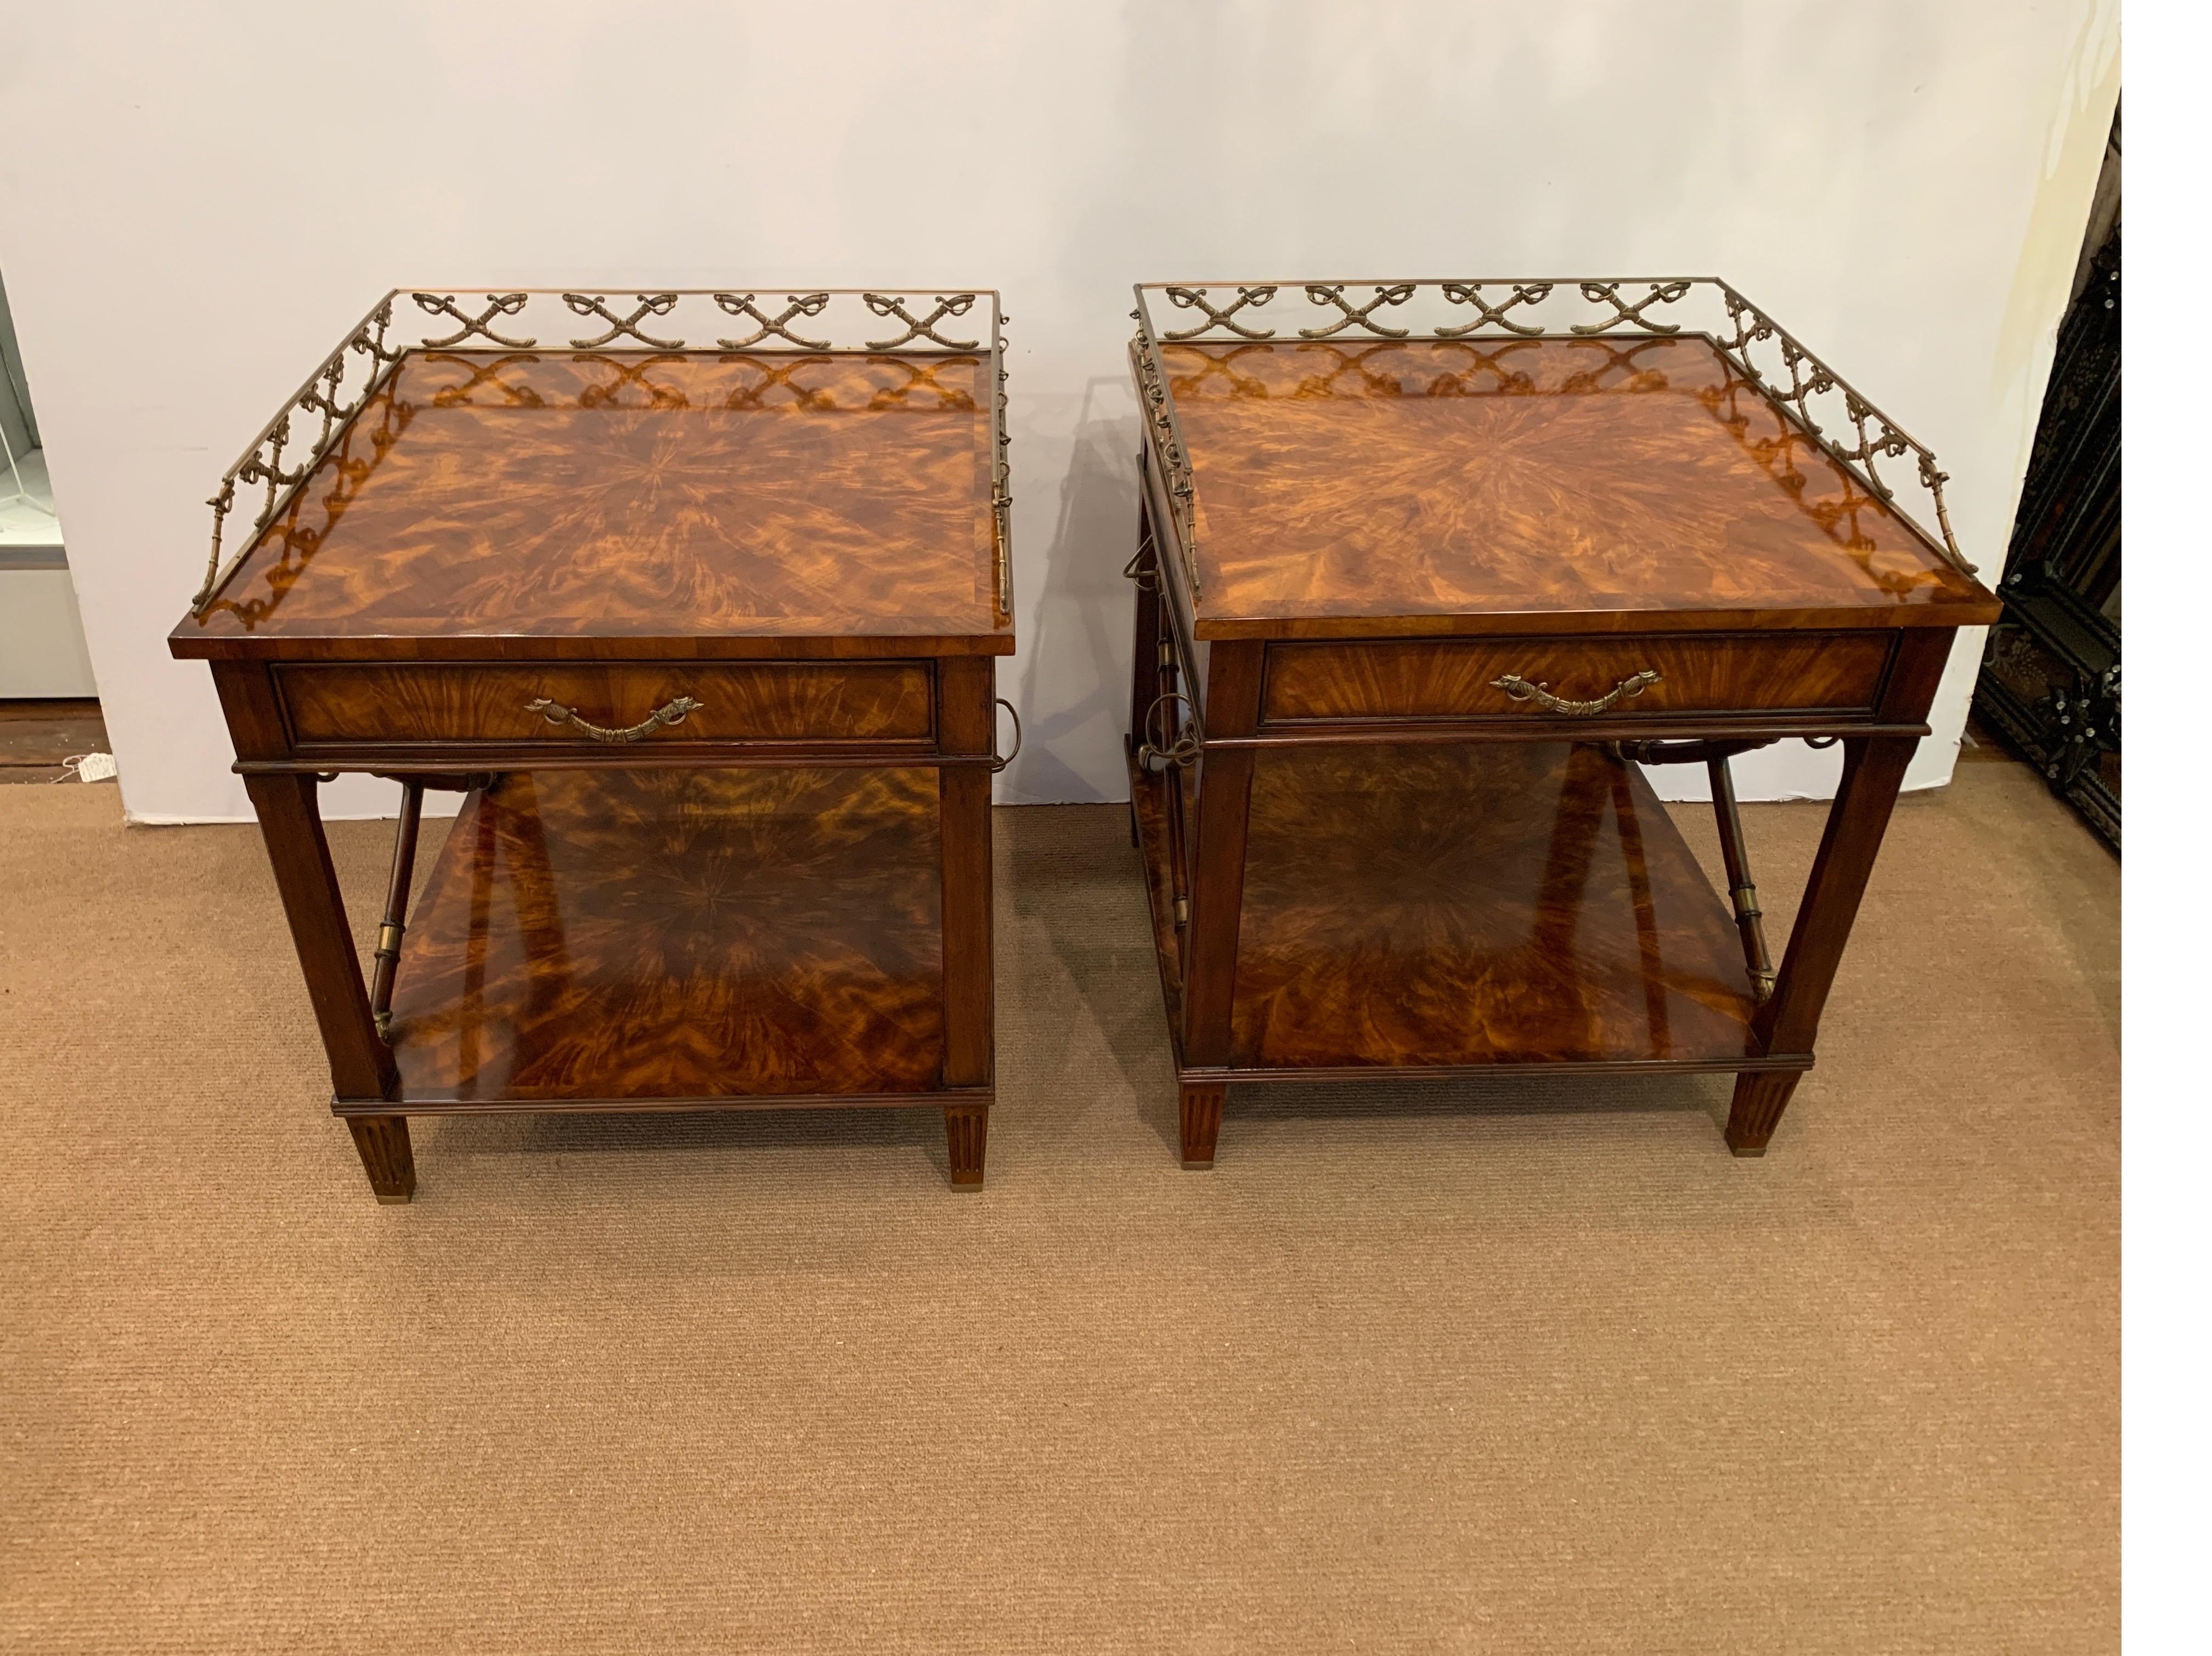 A pair of fame mahogany square side tables with cast brass gallery and mounts. The mounts with a sabre motif. The tables with upper drawer over an open shelf. Inside the drawer is an attached medal that reads 